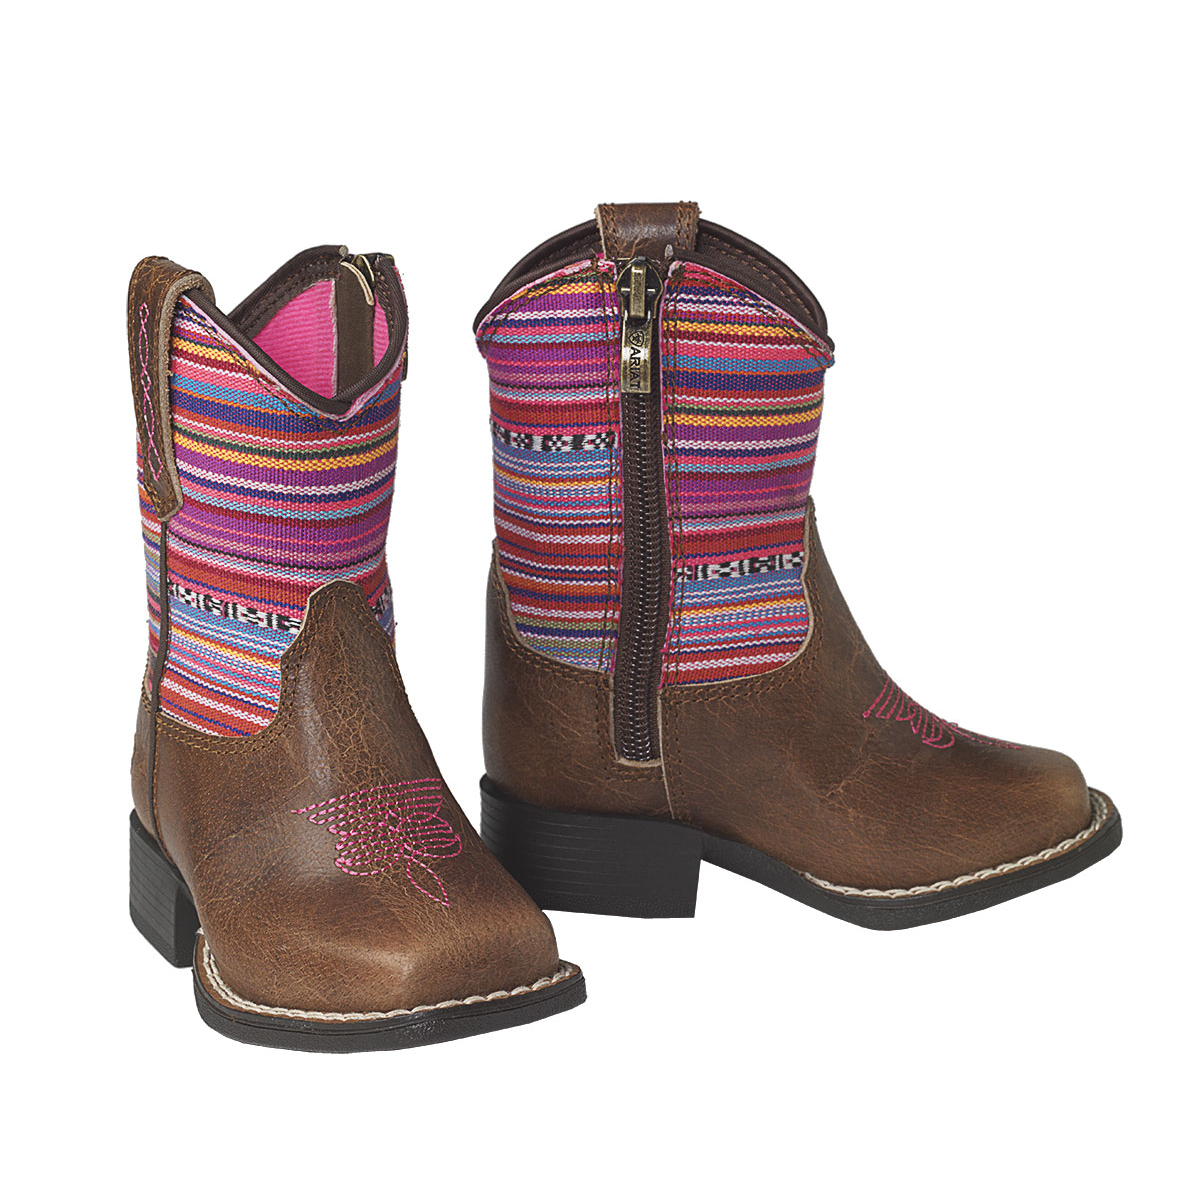 Ariat Toddler Girls Aurora Lil' Stompers Western Boots - Multicoloured/Brown